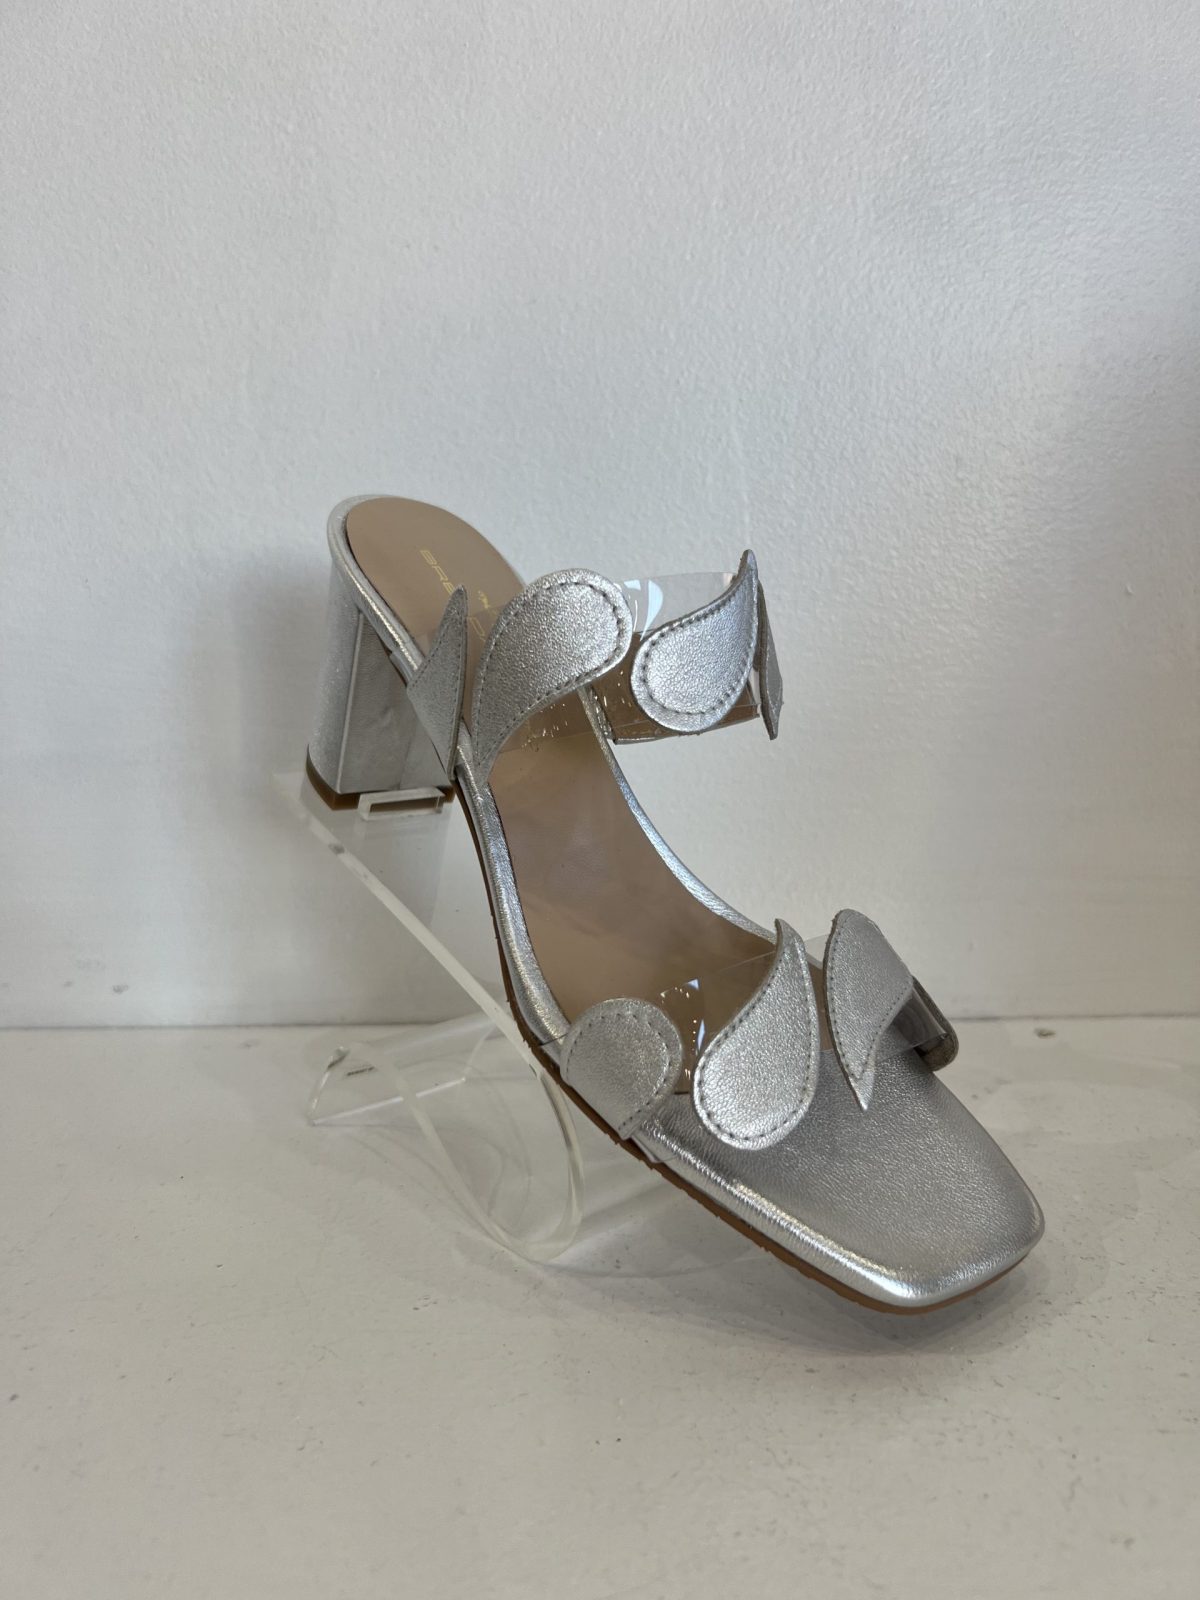 Brenda Zaro 4307 Silver two strap sandal with mauve leather tears.| Ooh Ooh Shoes women's clothing and shoe boutique located in Naples and Mashpee